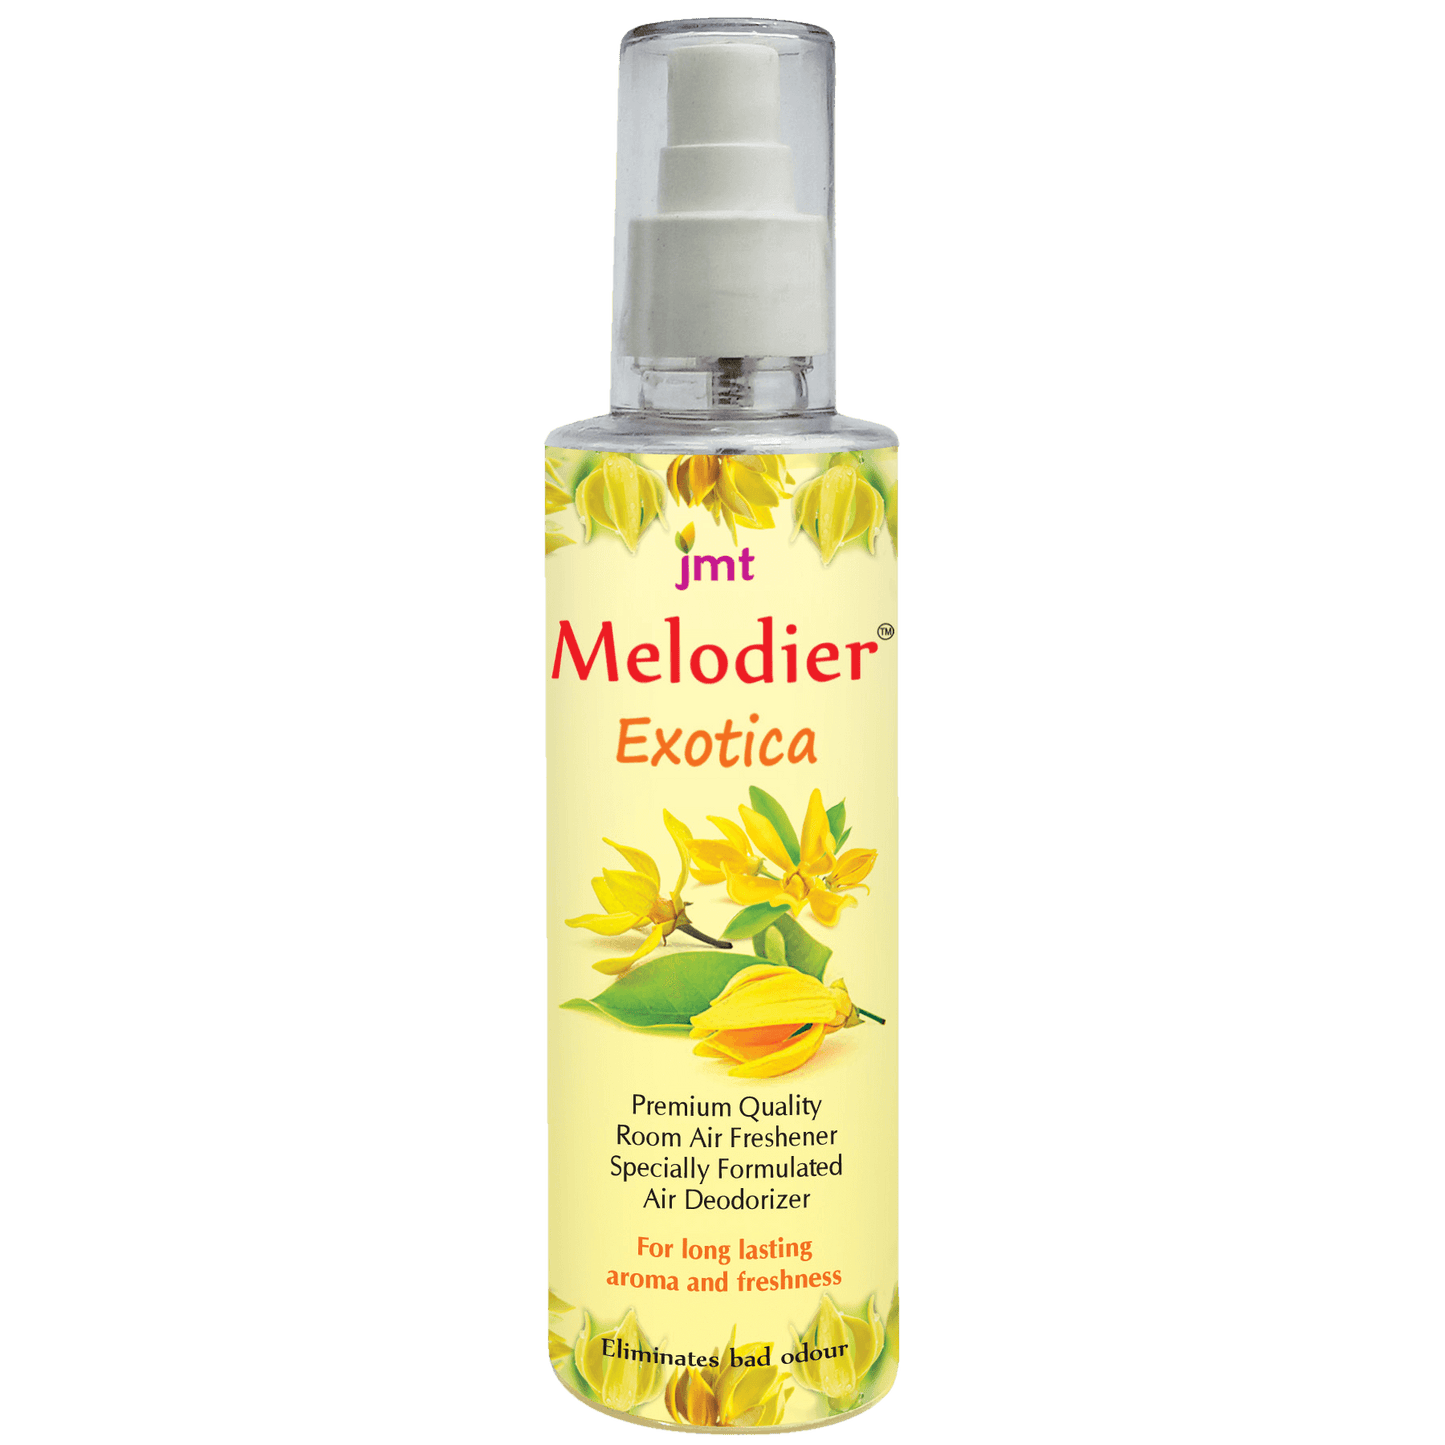 Buy Three, Get Four - Pack of 4 x 200ml Melodier Room Air Freshener and A True Deodorizer